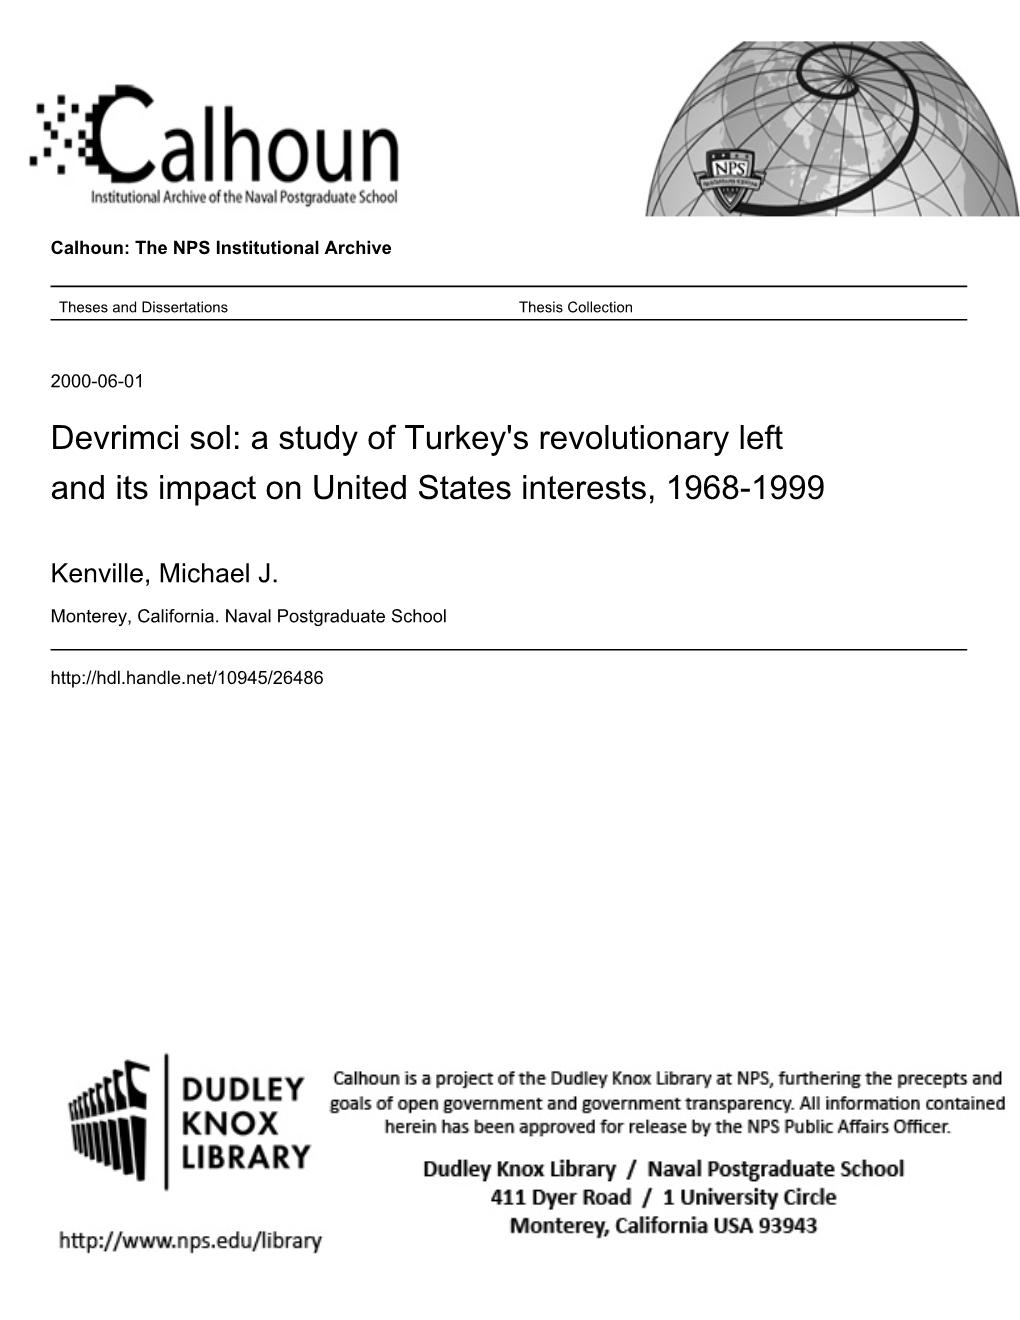 Devrimci Sol: a Study of Turkey's Revolutionary Left and Its Impact on United States Interests, 1968-1999